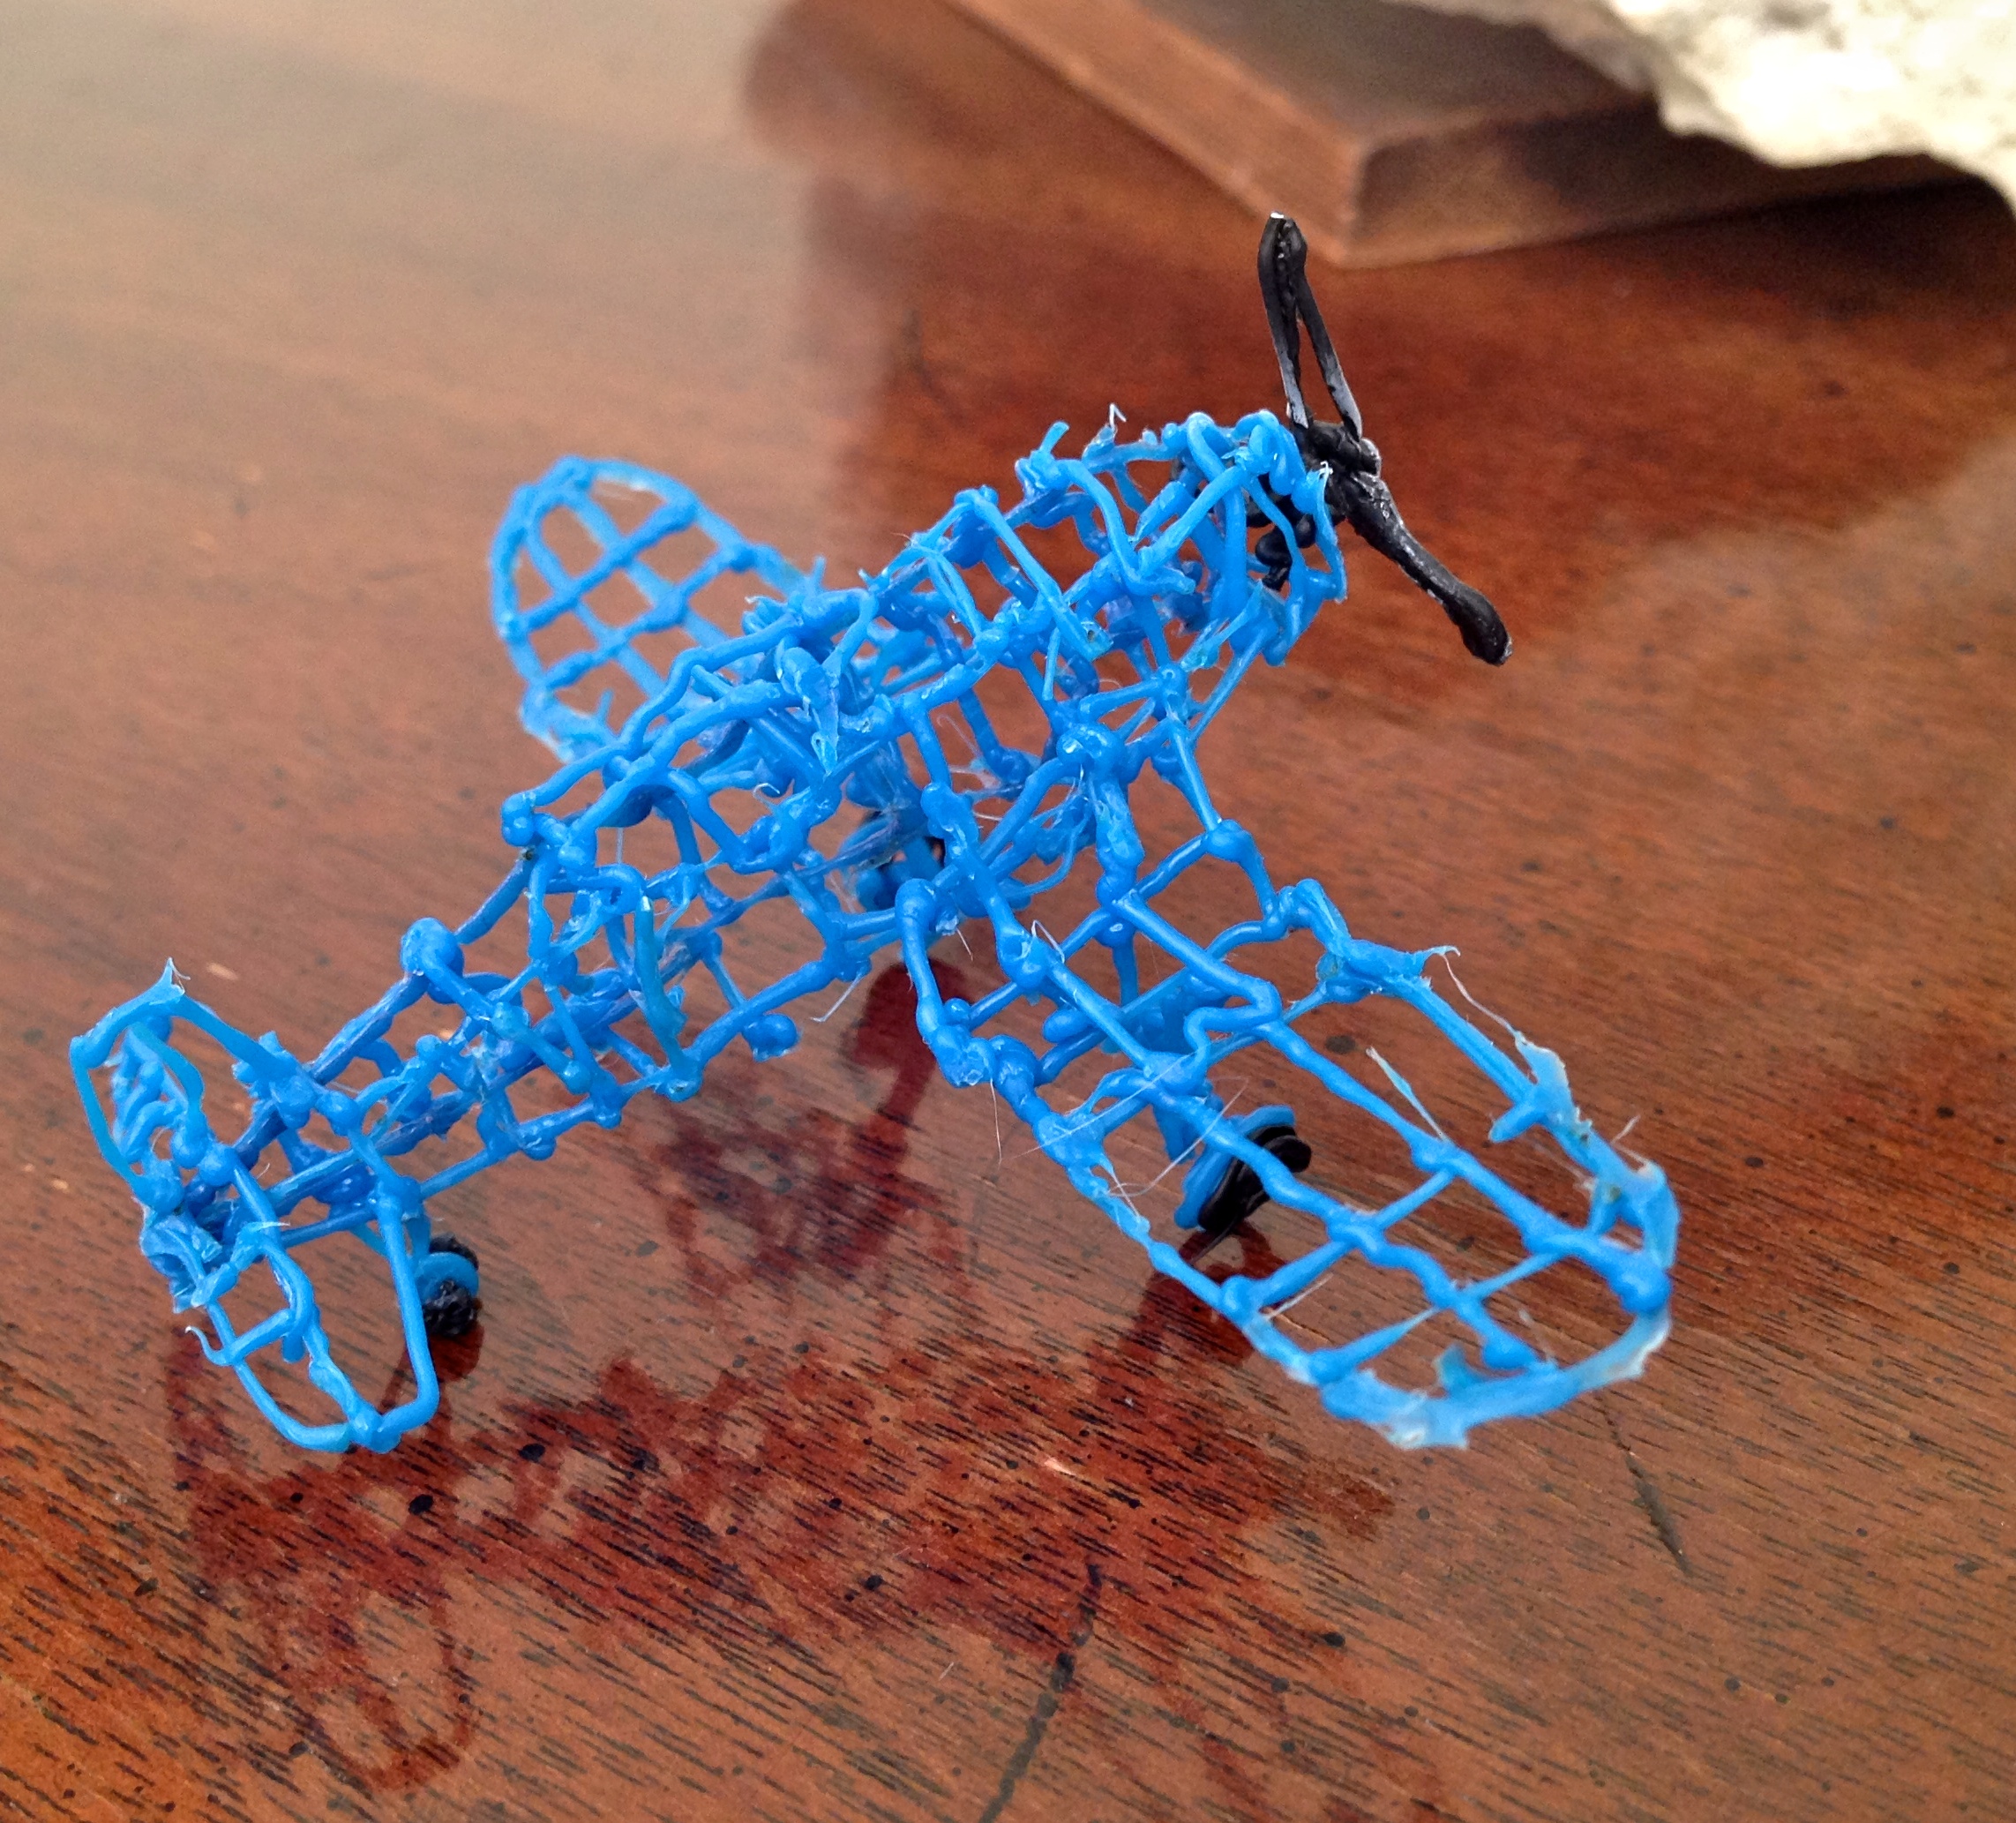 Pictured is a blue airplane with a black propeller made from 3-D print filament.